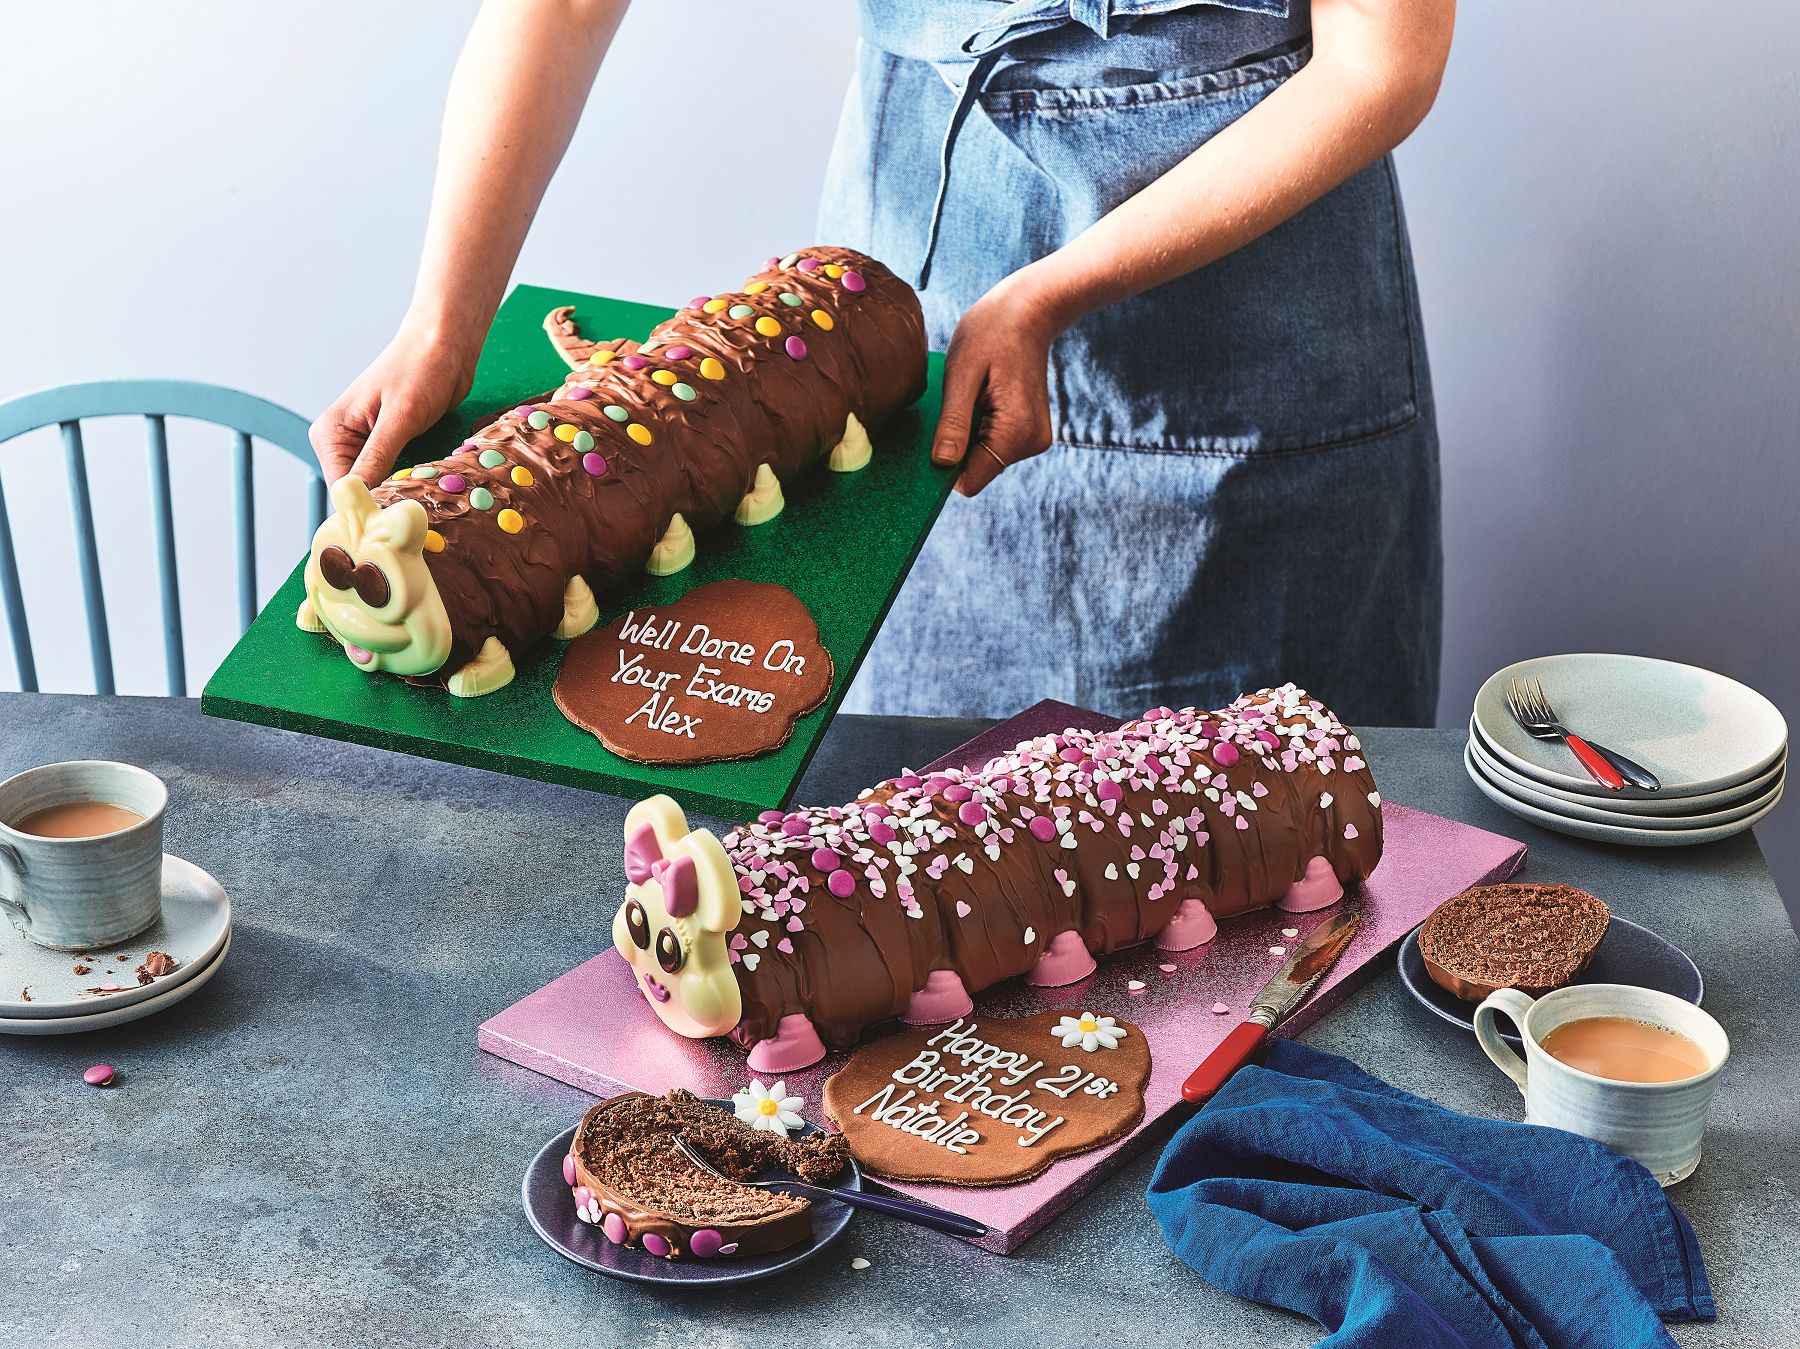 M&S selling giant personalised Colin the Caterpillar cakes